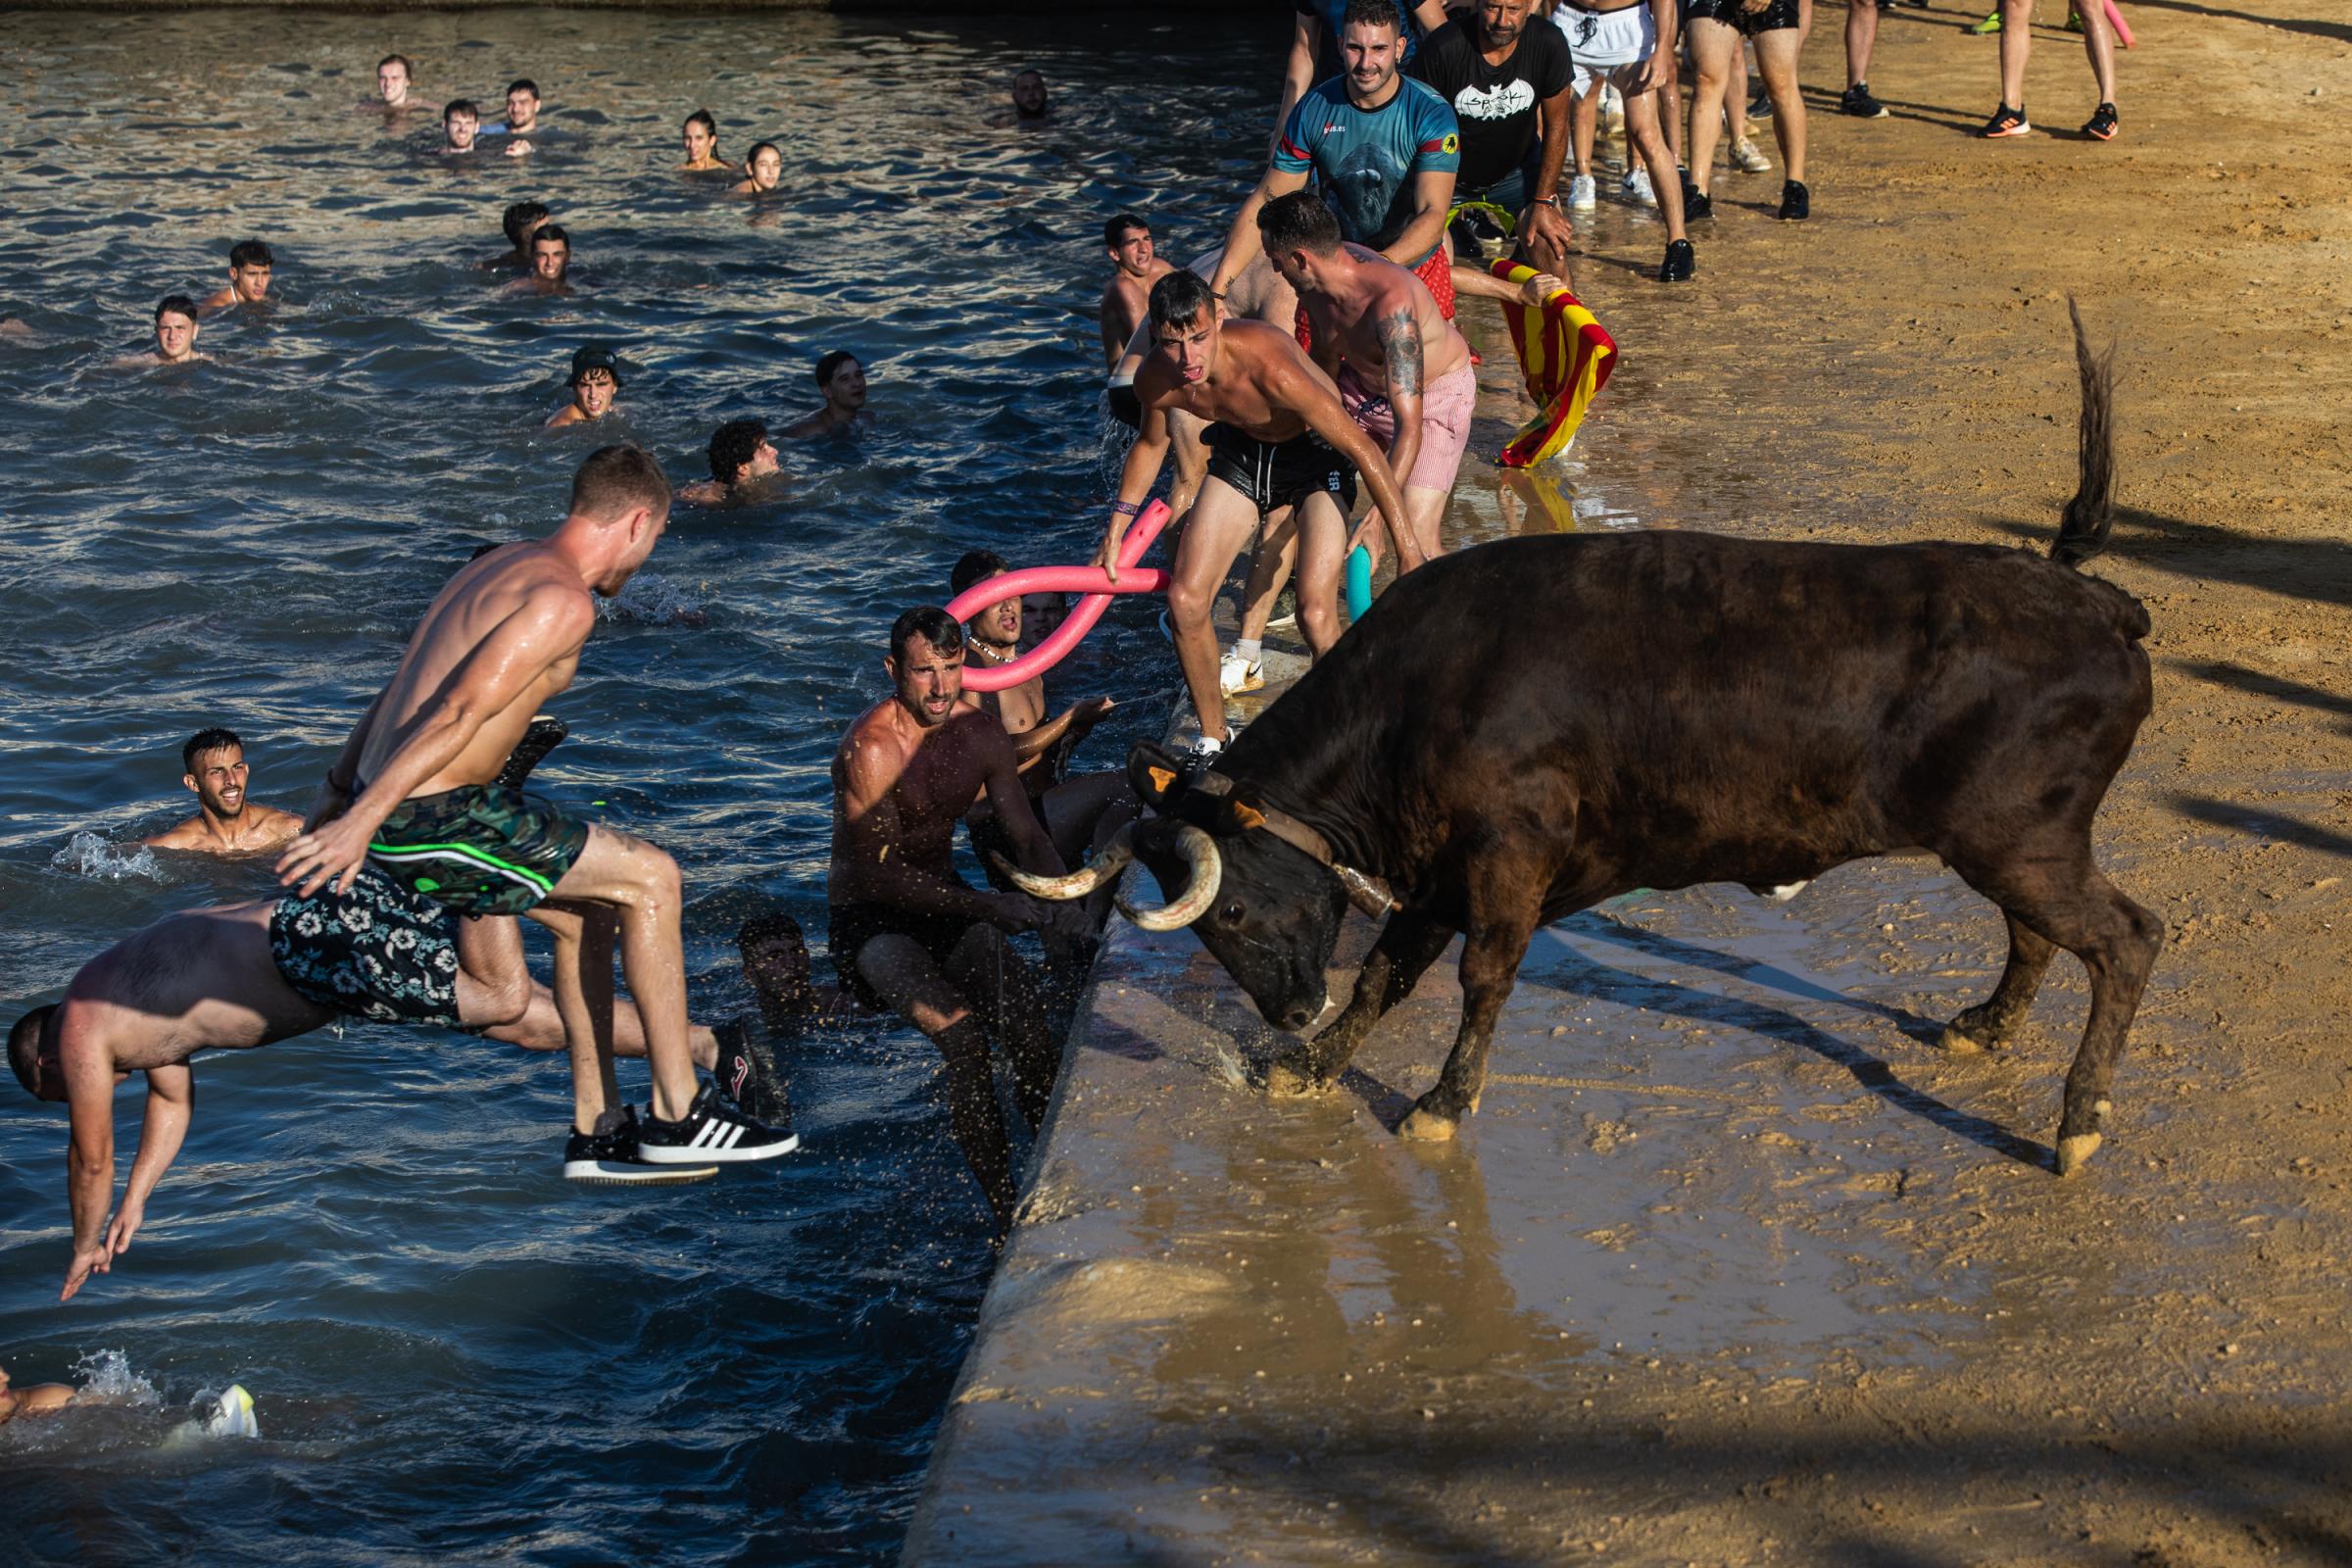 At 'Bous A La Mar', Revelers Take Plunge To Dodge Bulls And Beat The Heat - DENIA, SPAIN - JULY 17: The bull makes the participants...